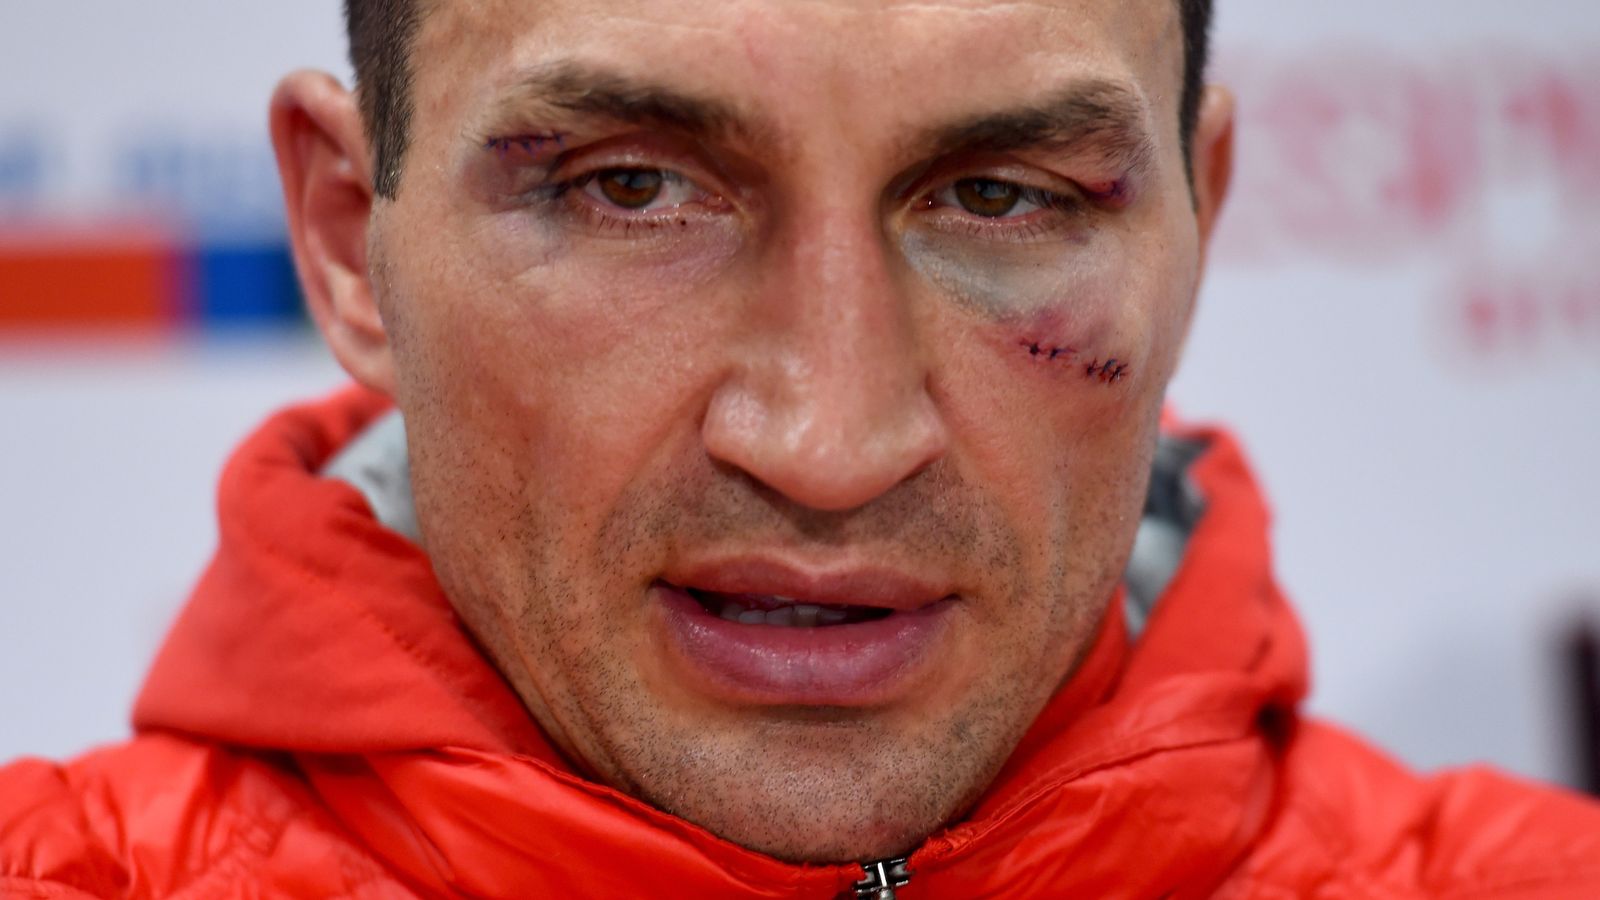 Wladimir Klitschko vows to fight on after defeat to Tyson Fury | Boxing News | Sky Sports